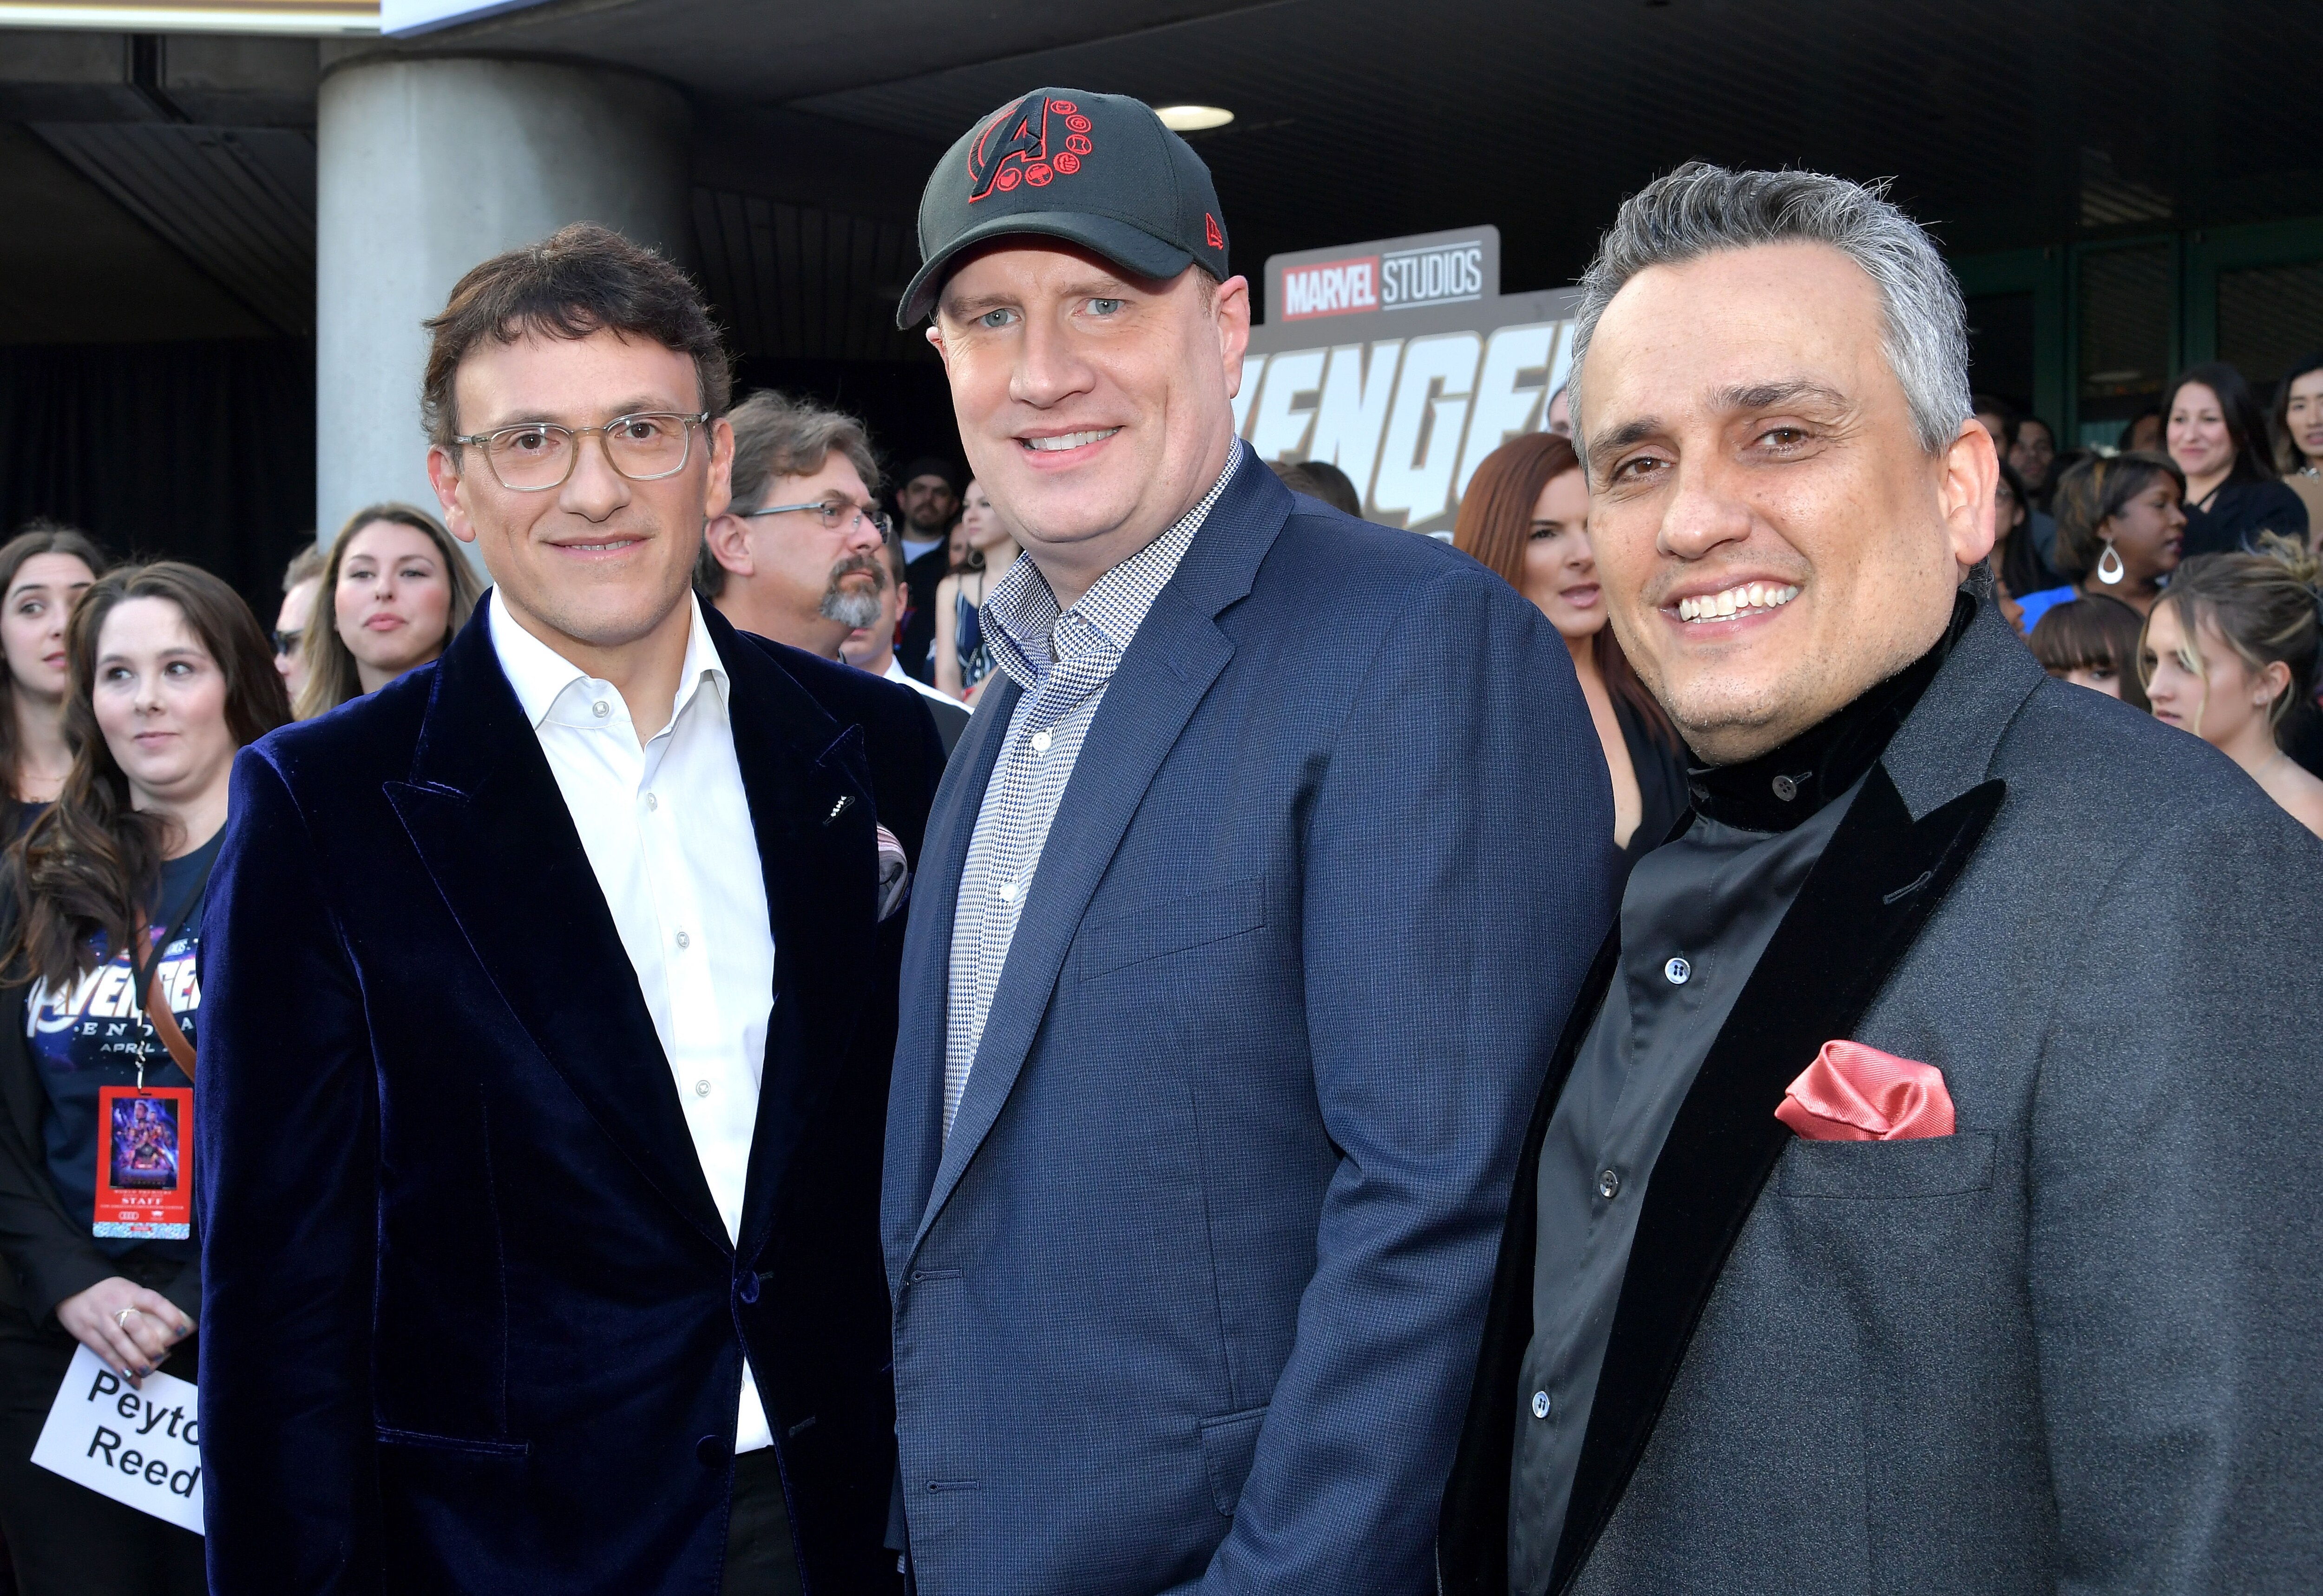 Russo Brothers Kevin Feige Avengers Endgame